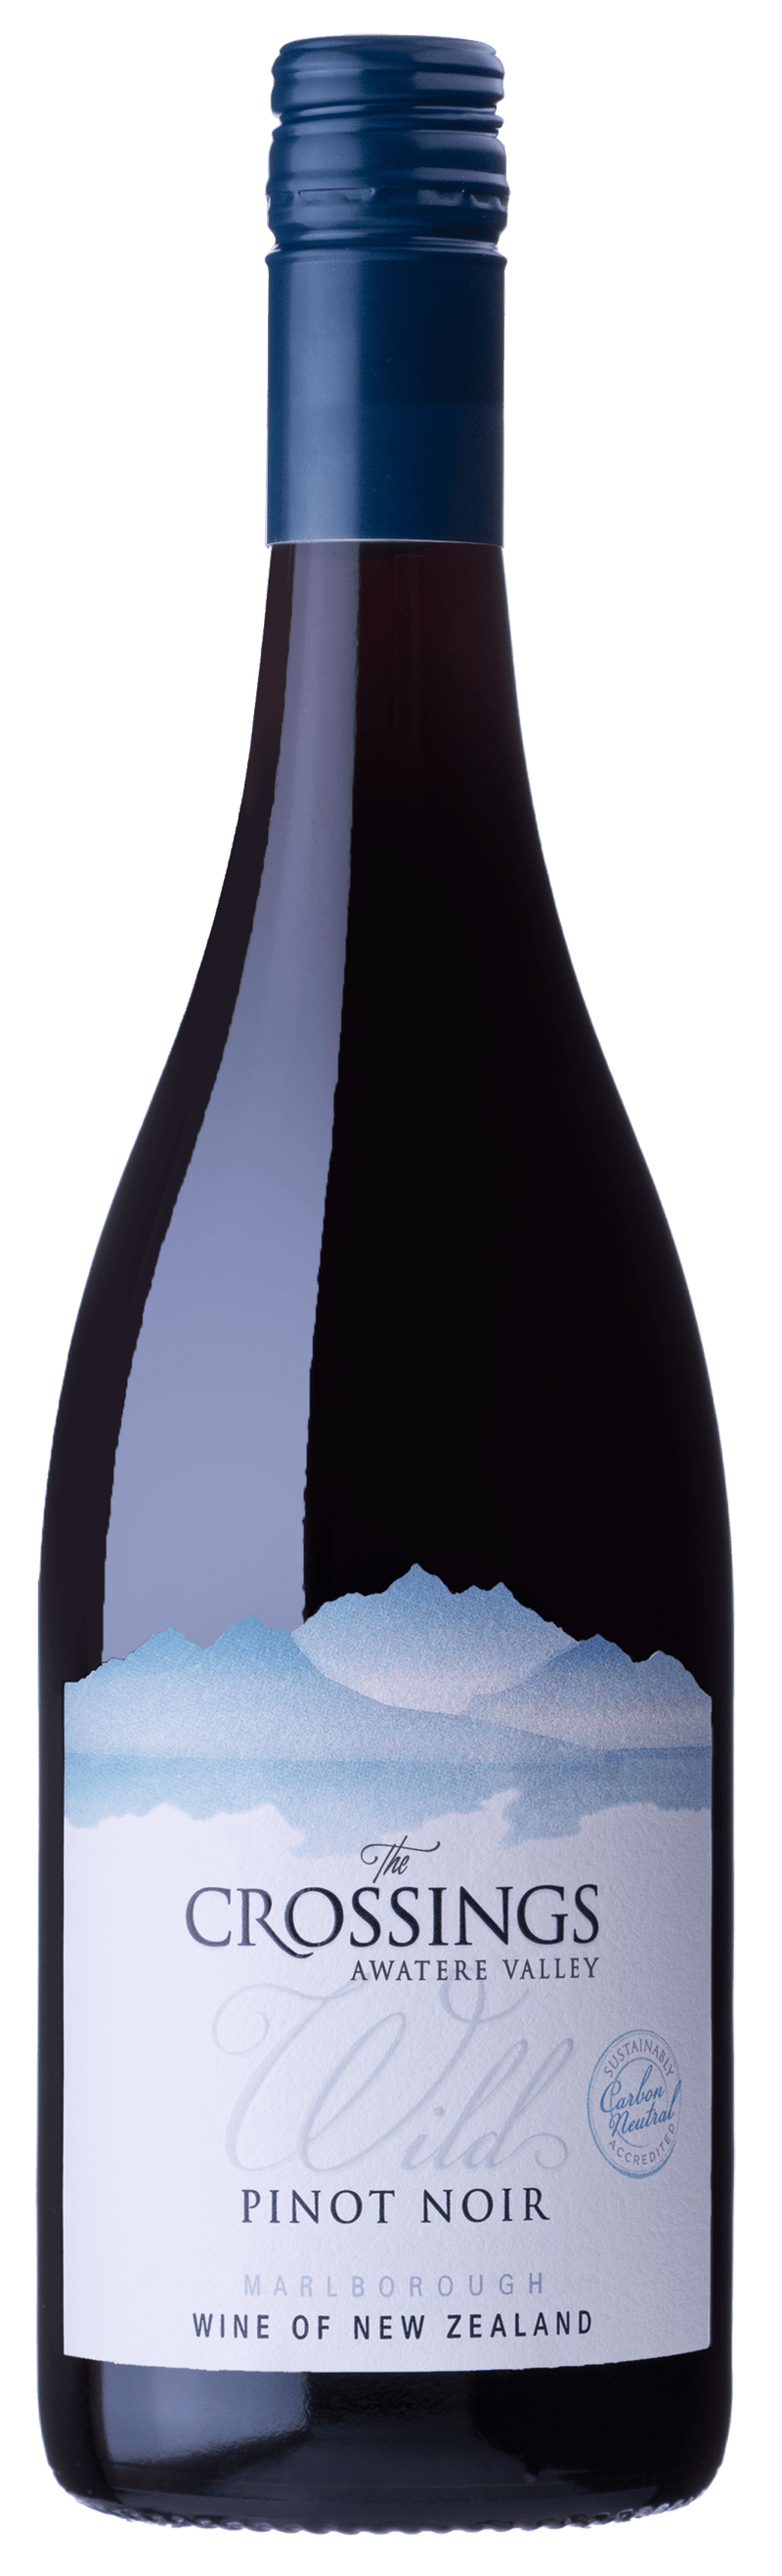 The Crossings Awatere Valley Wild Reserve Pinot Noir 75cl